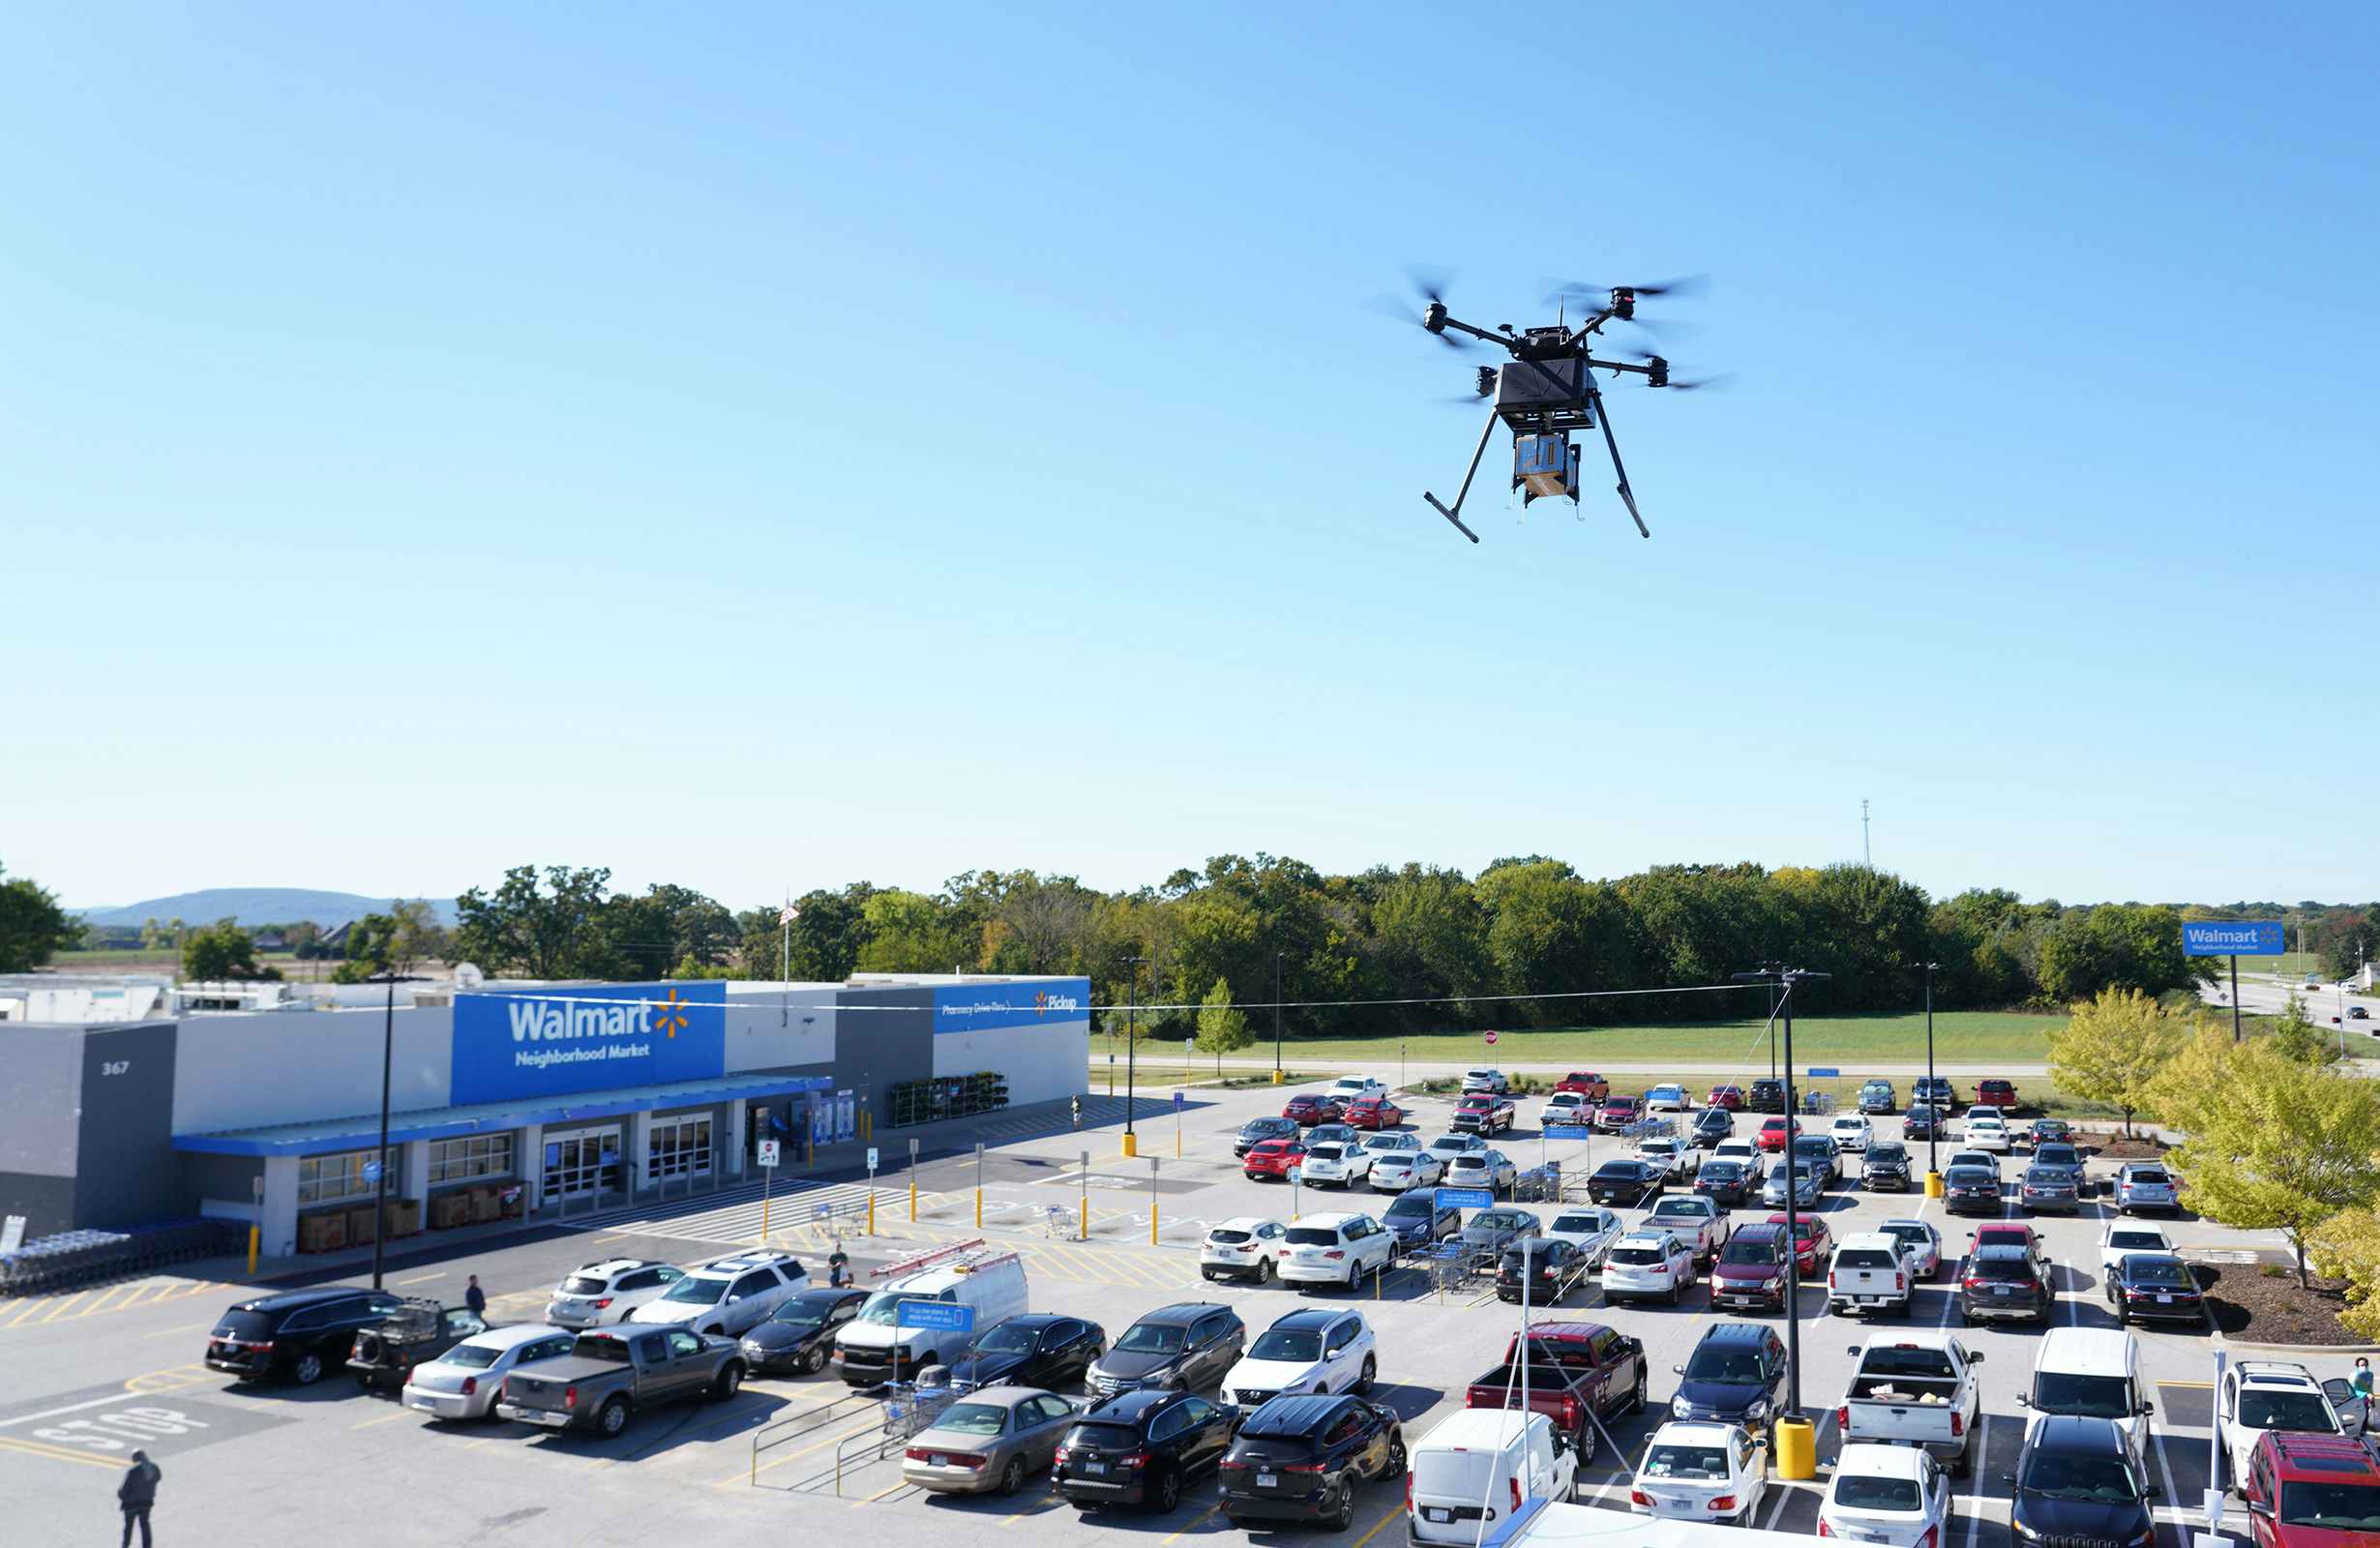 A drone carrying a Walmart delivery box in the sky above a Walmart.